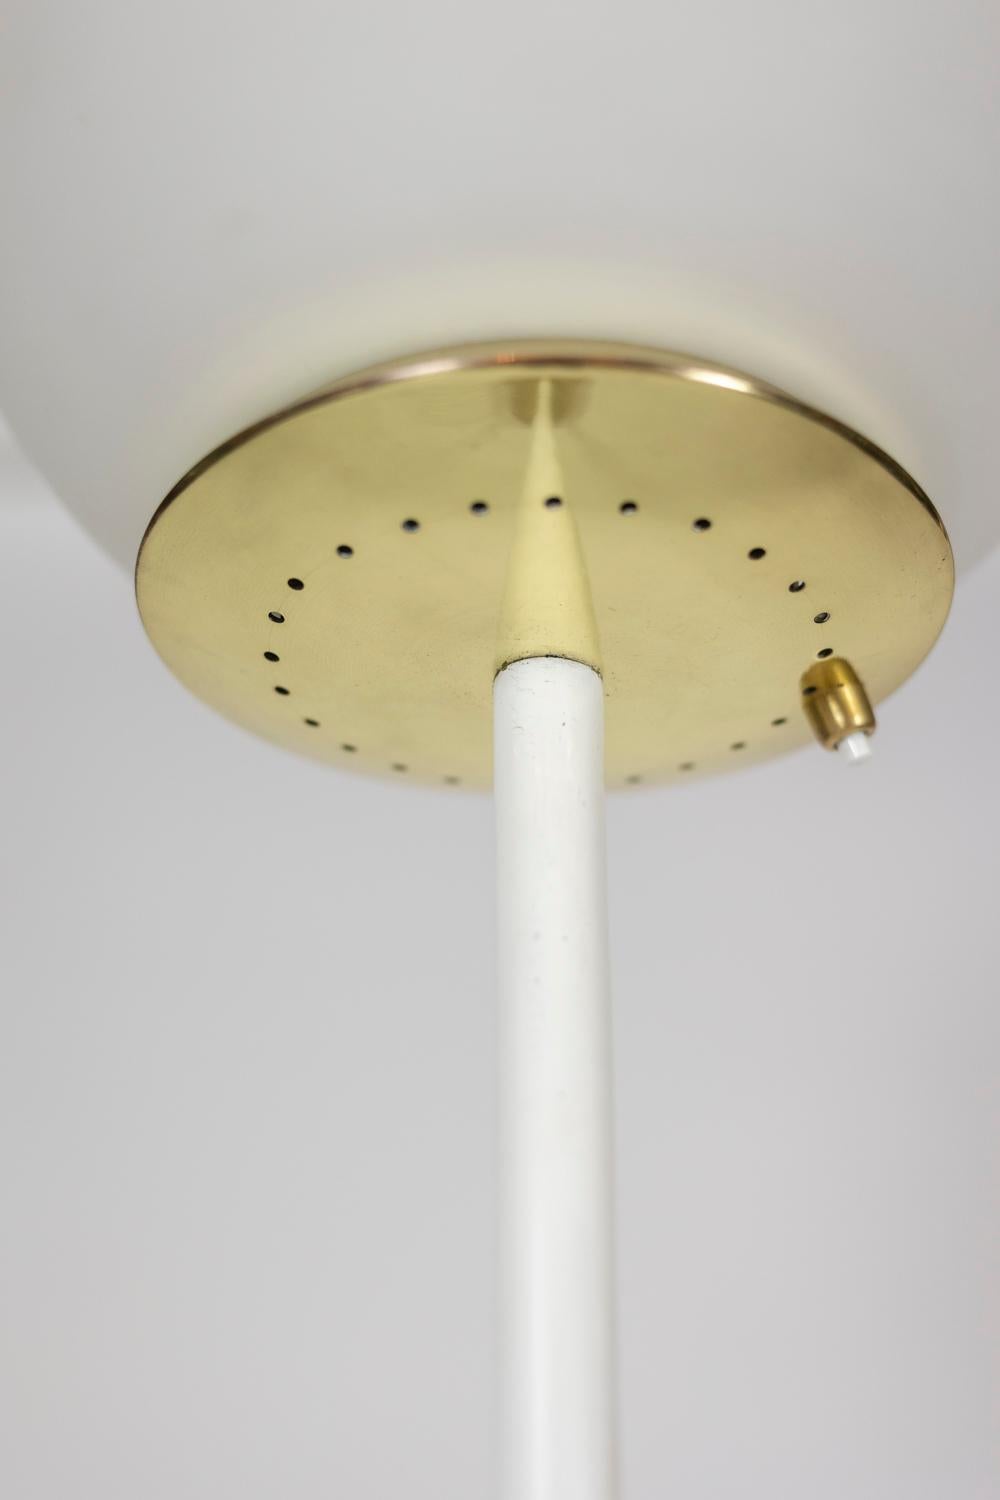 Floor lamp made of white opaline surrounded by gilded and perforated brass, with its white lacquered metal shaft resting on a circular travertine base.

Italian work realized in the 1950s.

Reference: LS5923588I